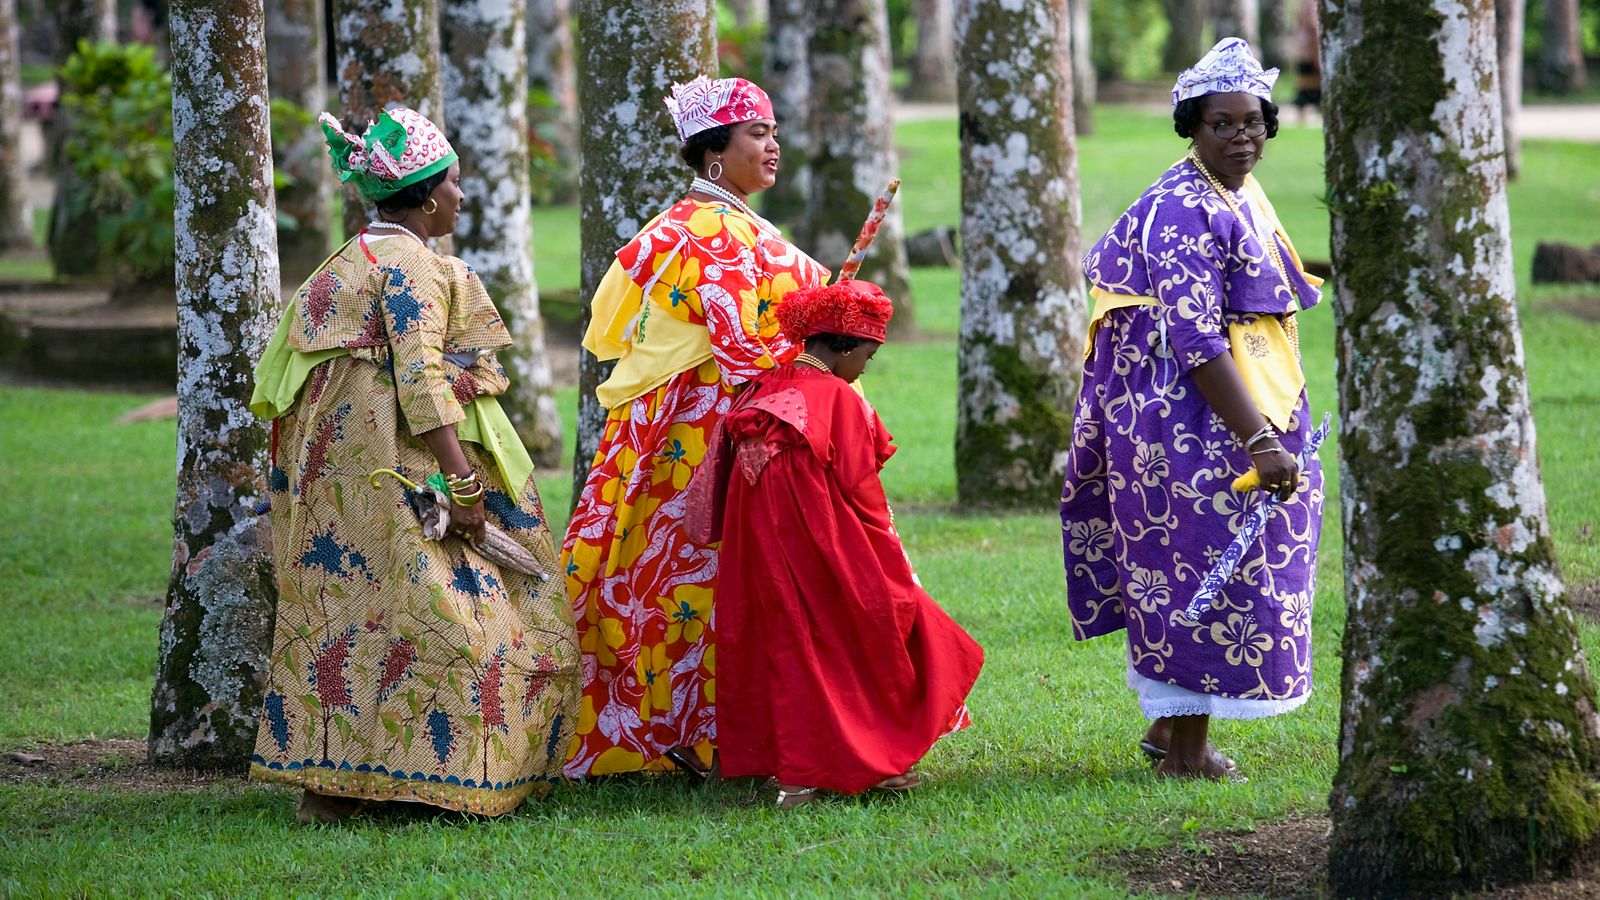 thisisnotahat on X: #Suriname, Paramaribo. Creole women in #Kotomisi  dress, the #national creole #costume. #thisisnotahat   / X